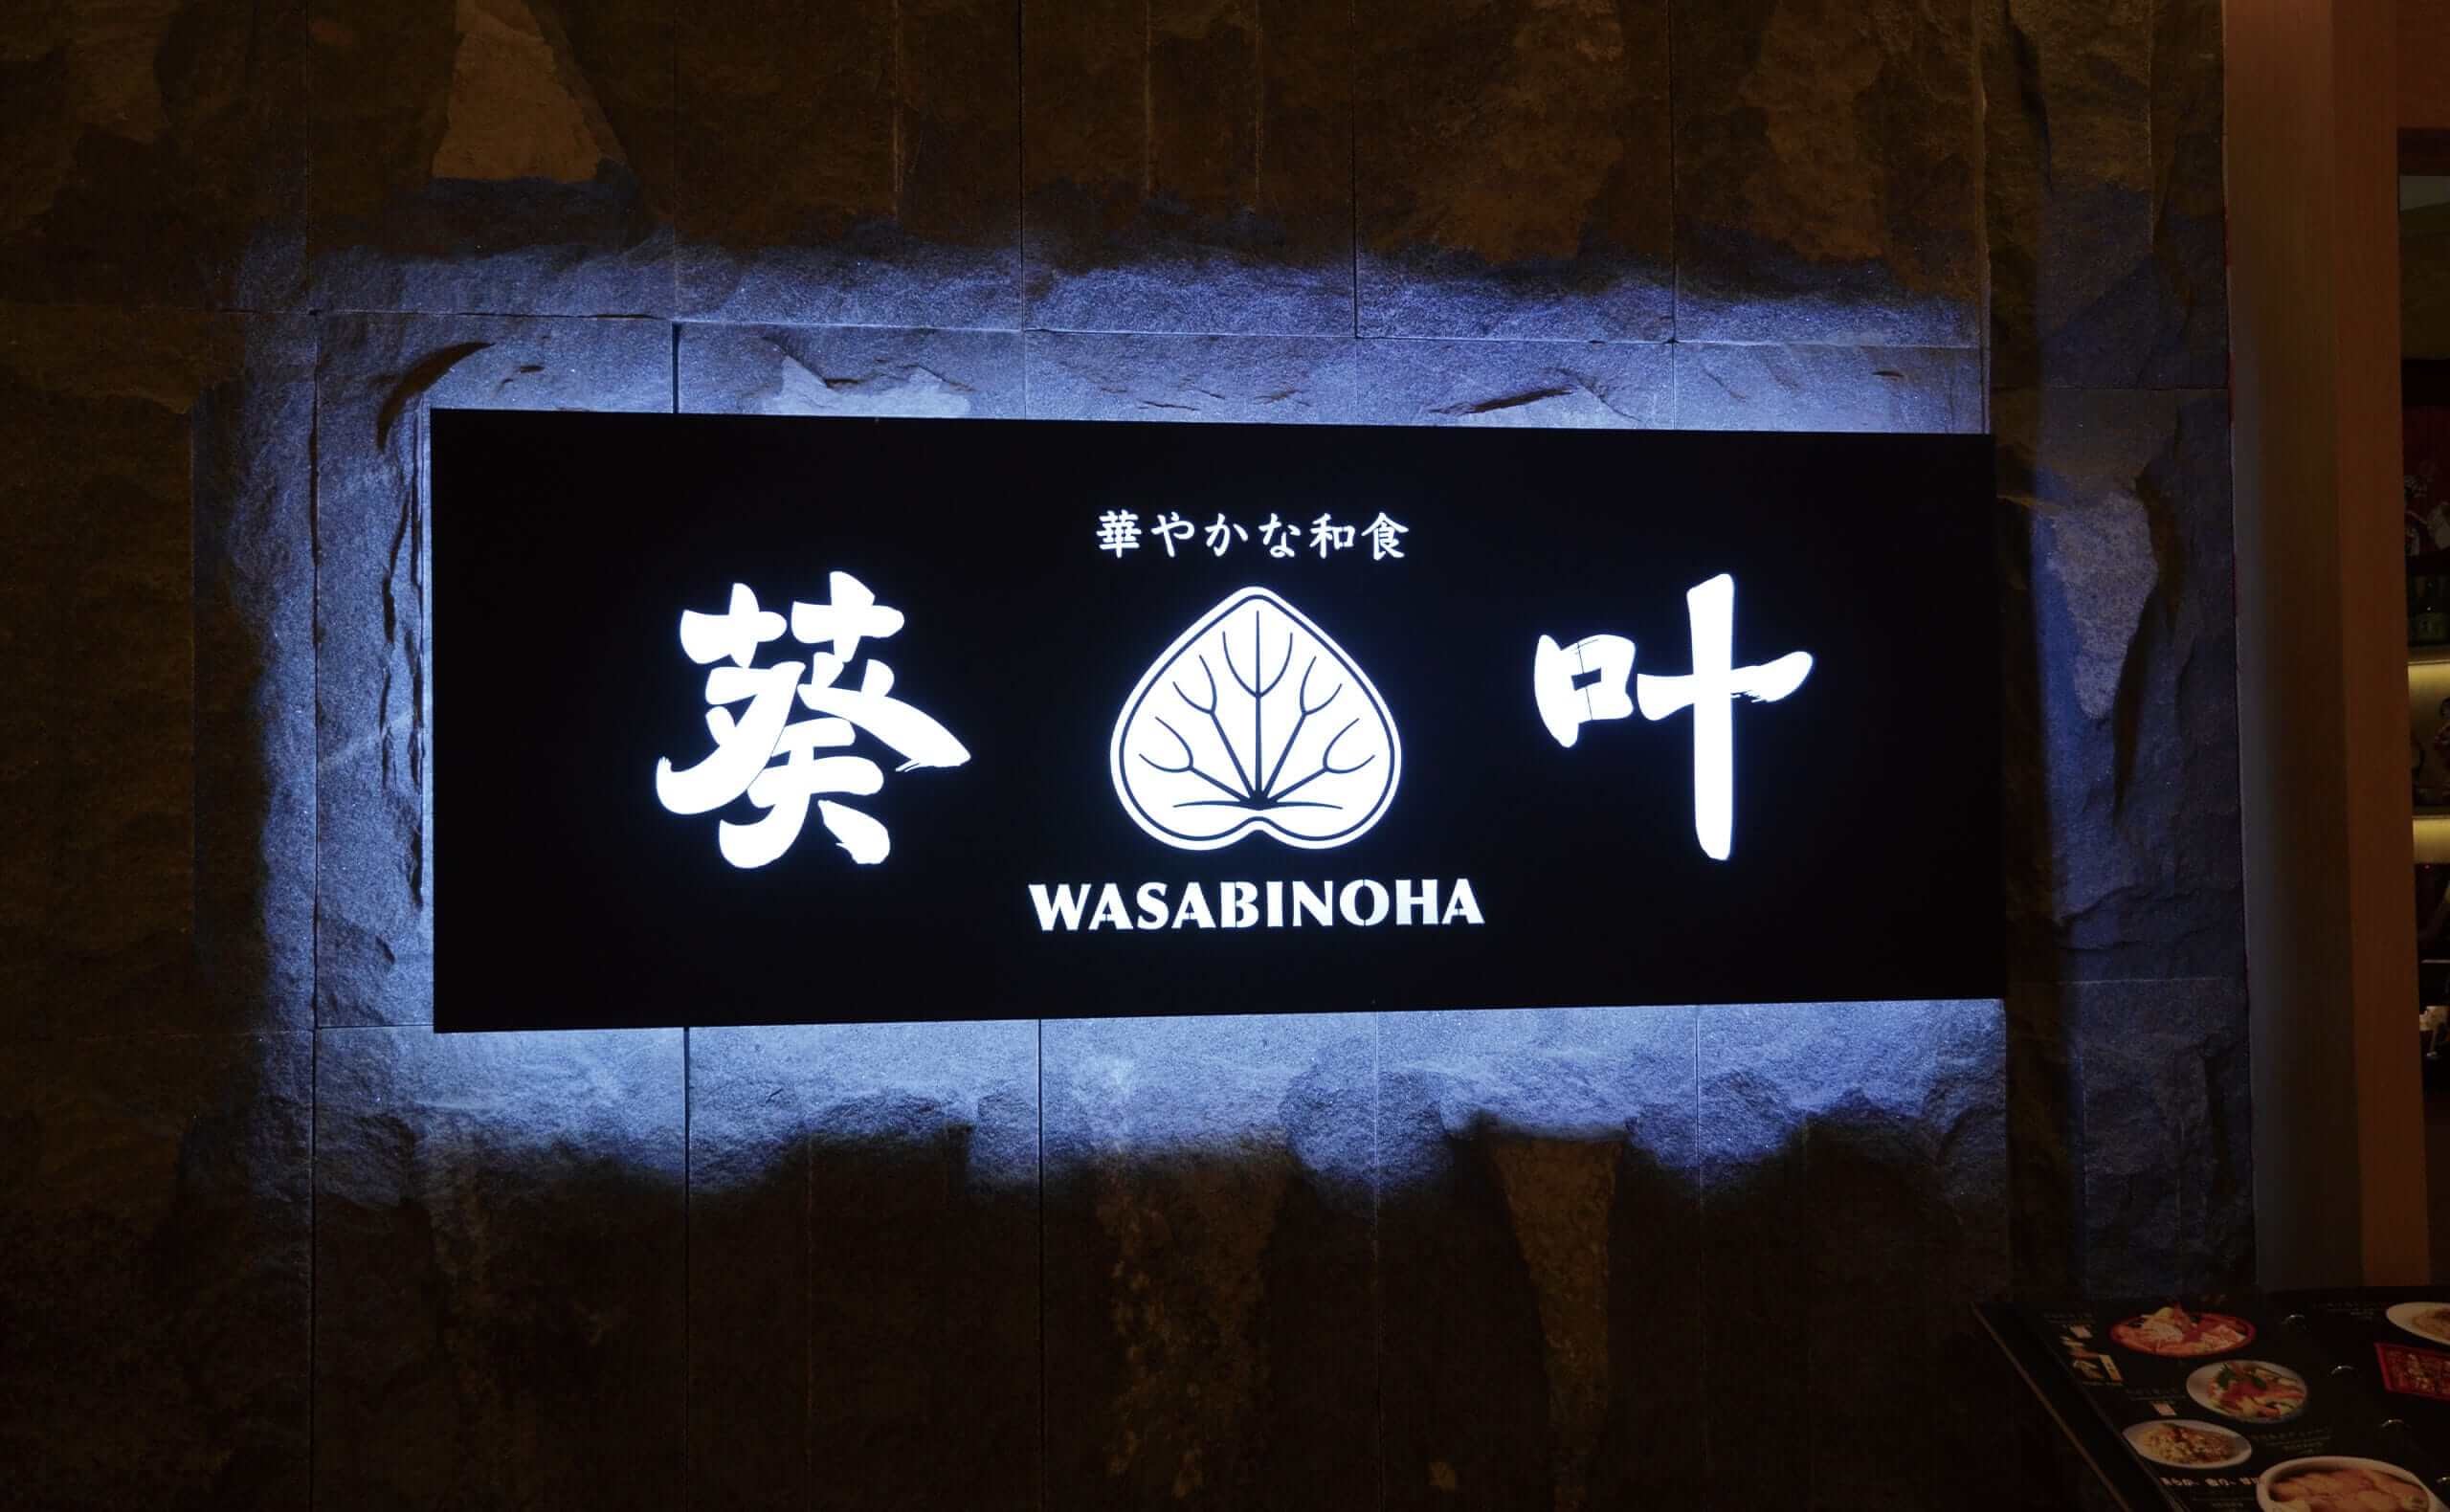 Single Sided Light Box Signs For Wasabinoha